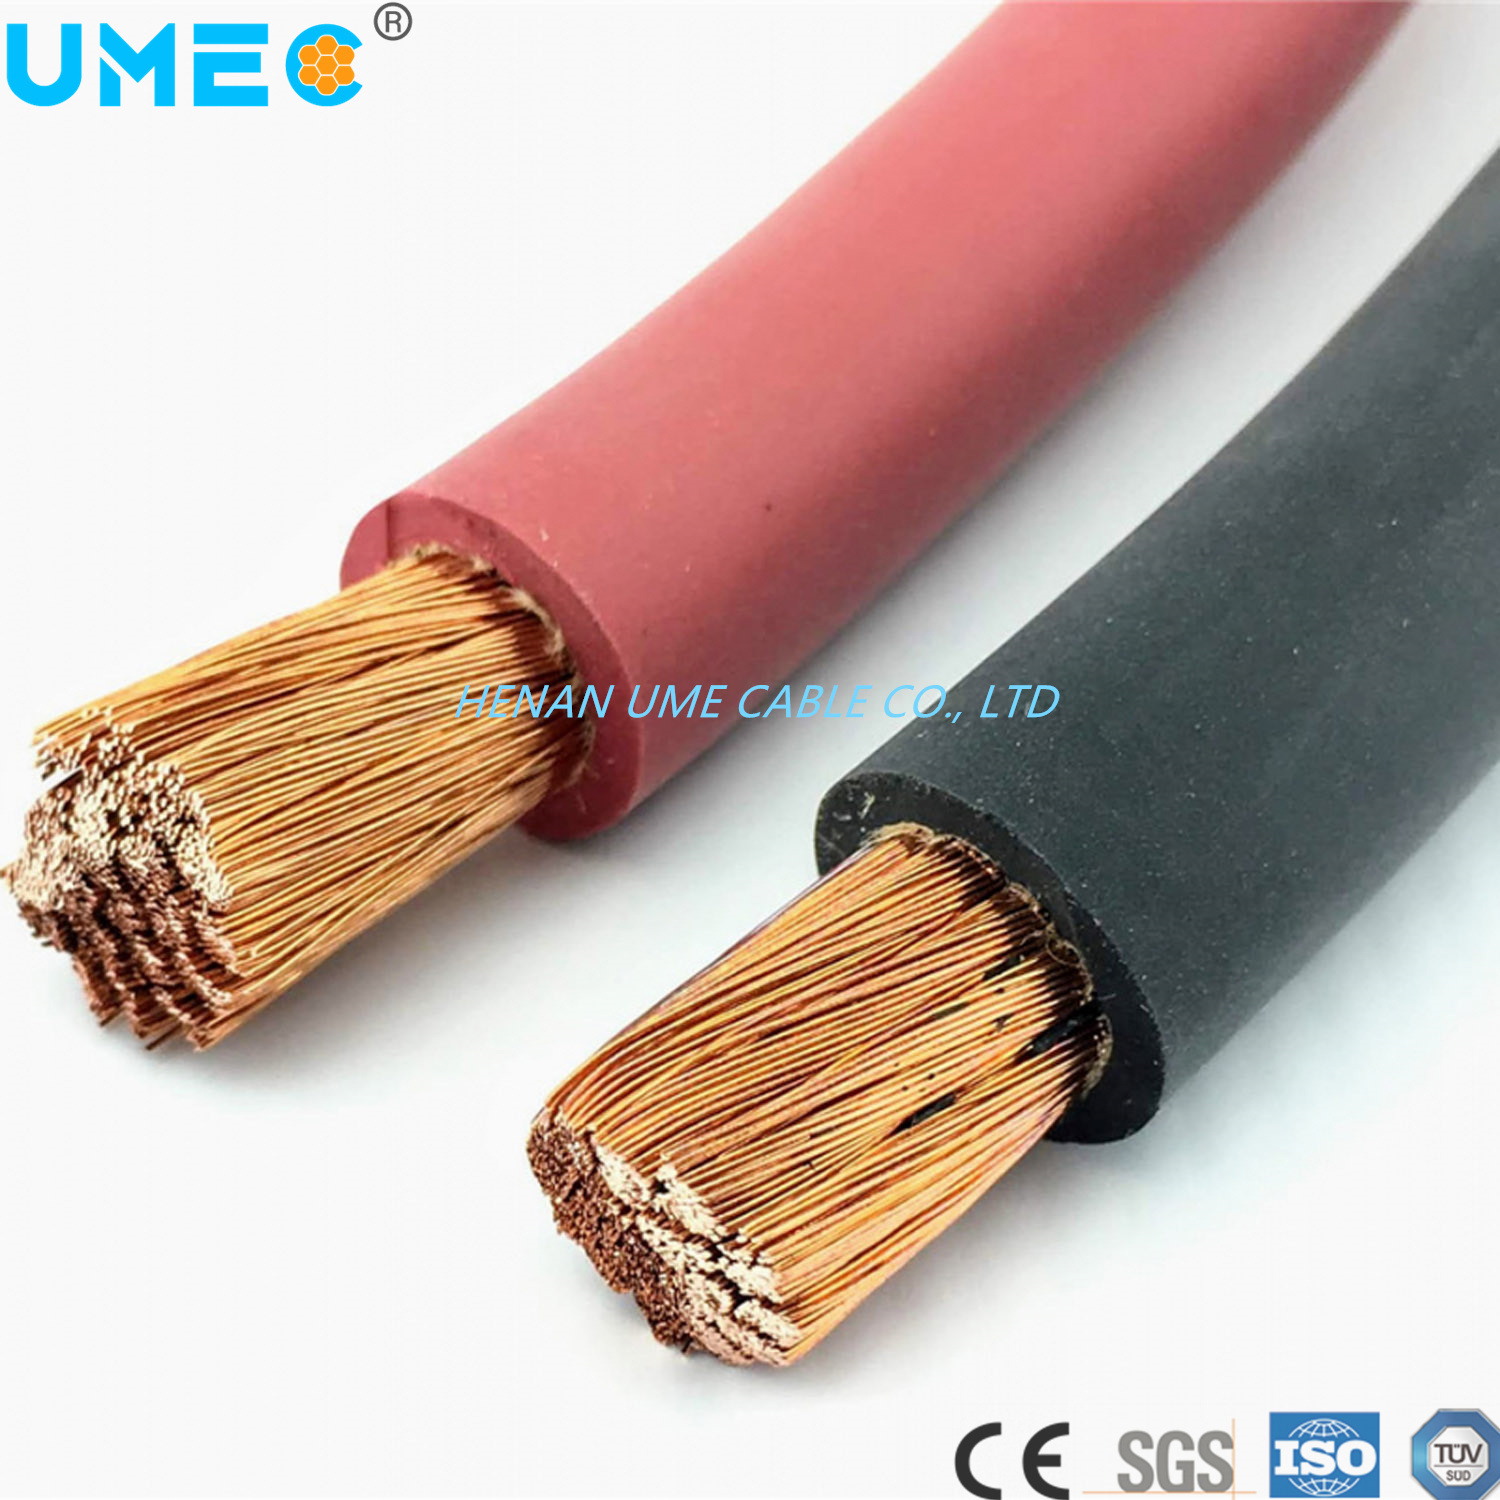 Yh Rubber Weiding Cable Power Cable Yh Rubber Weiding Cable Welding Machine Cable